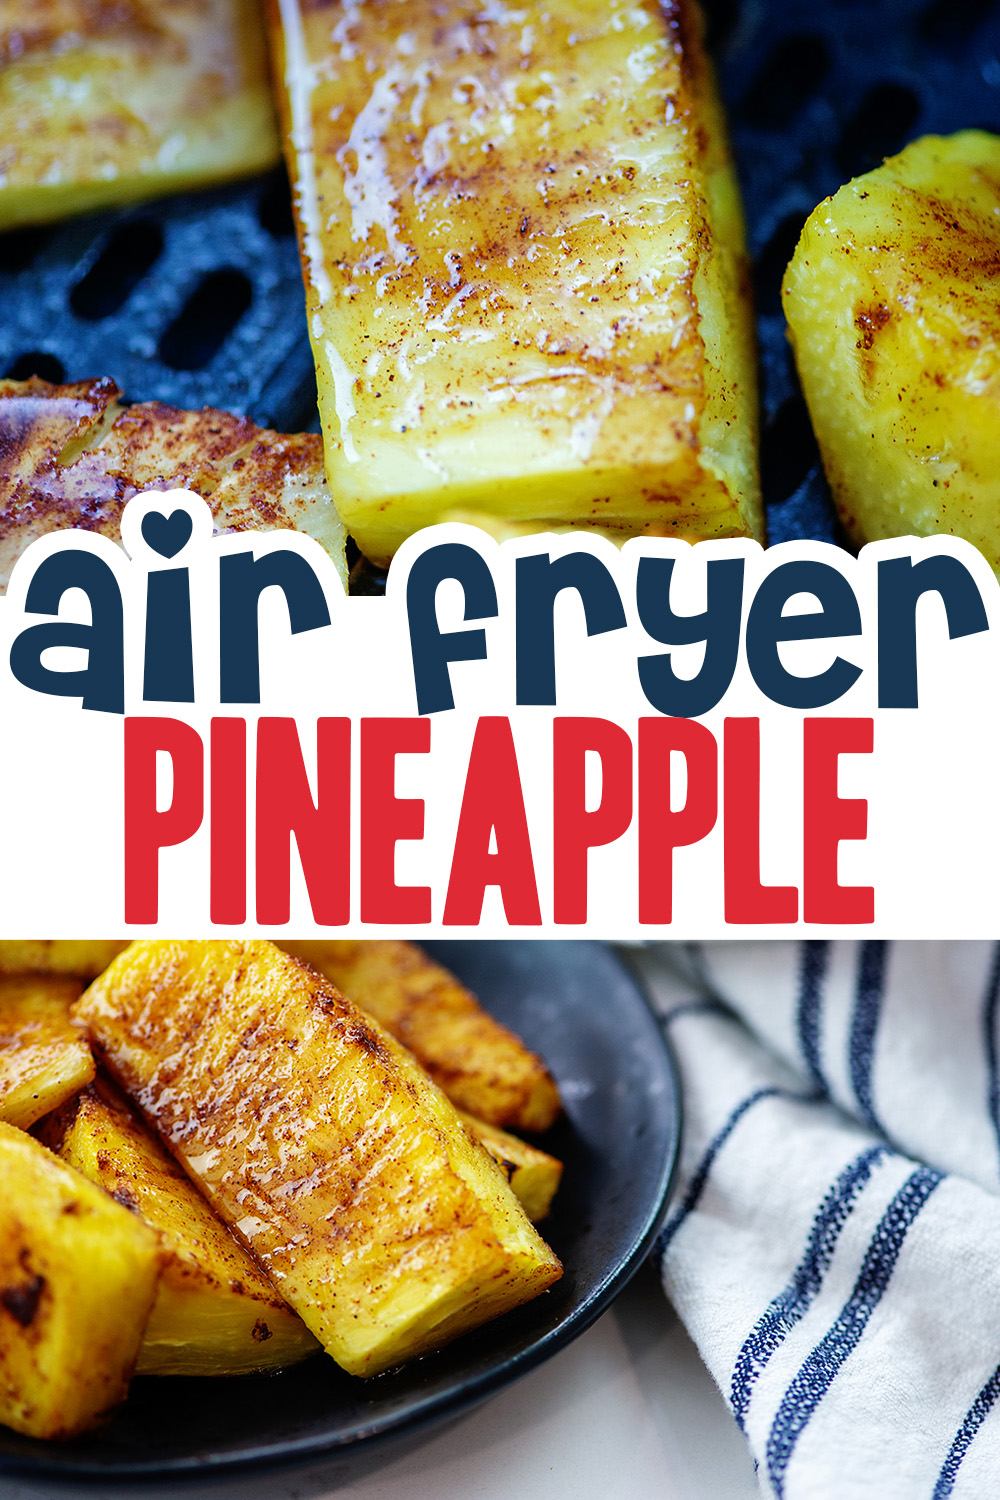 You have to try this cinnamon, air fried pineapple.  It is an amazing dessert!